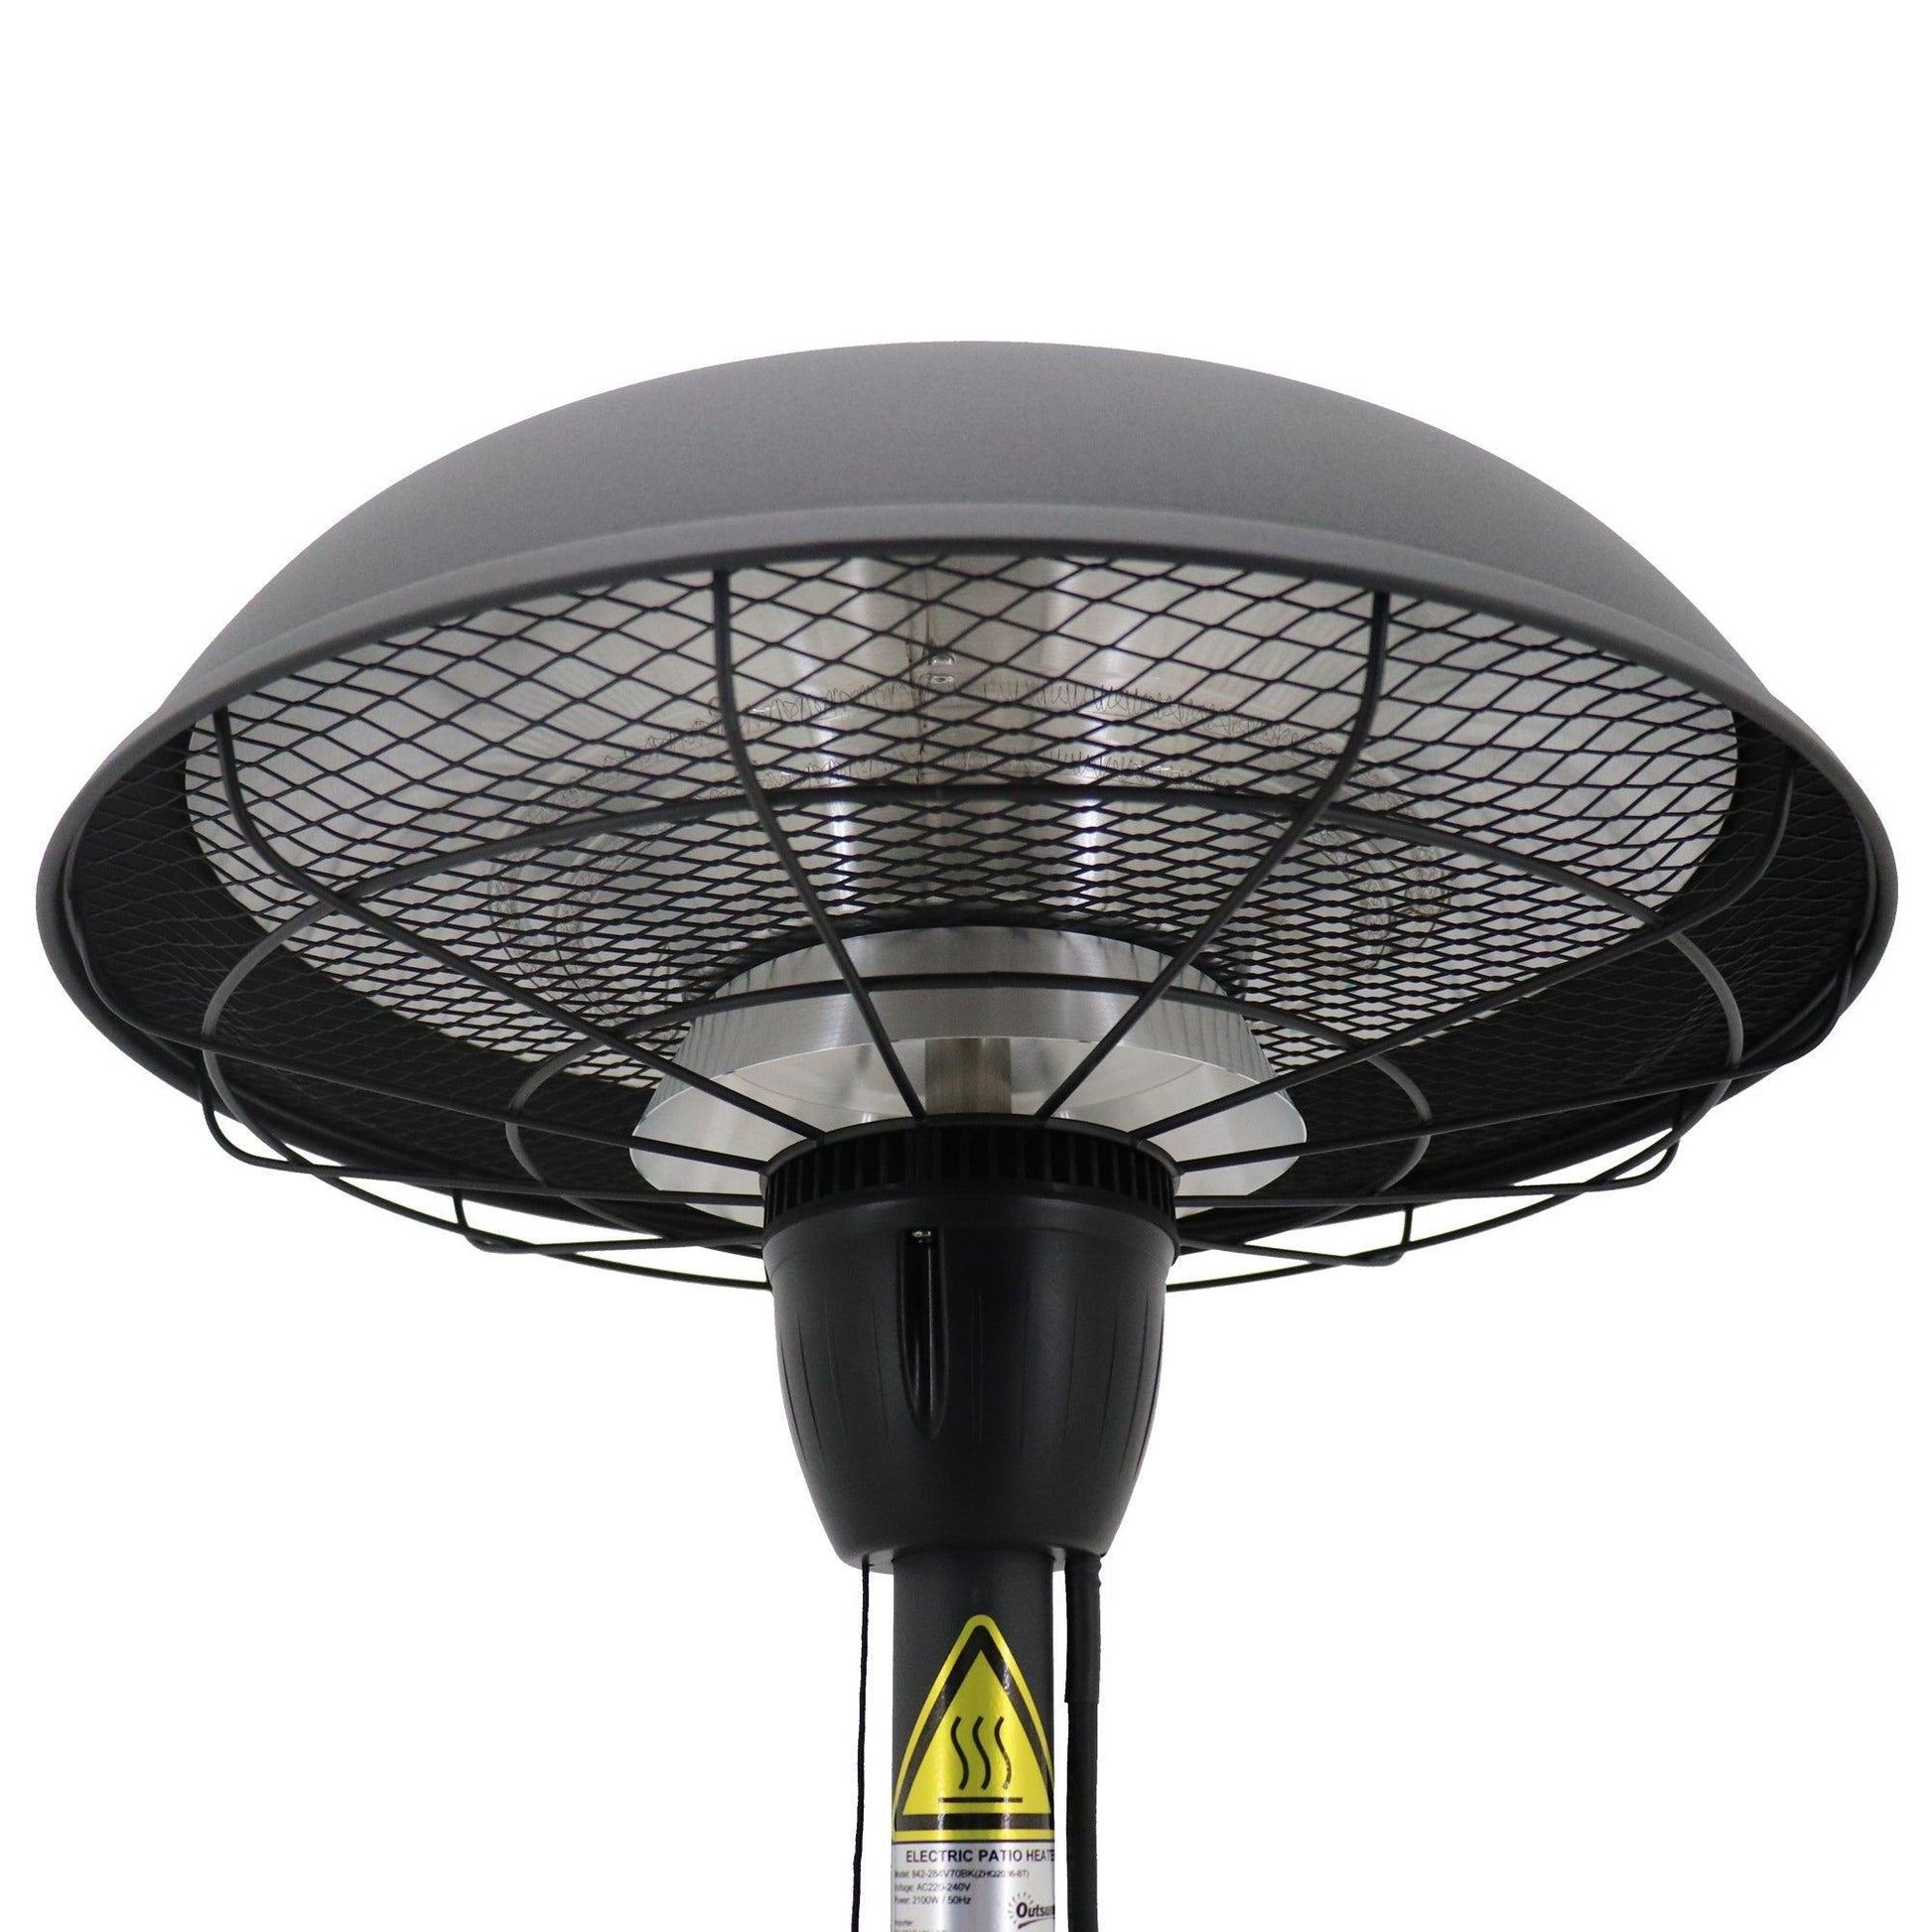 Outsunny Electric Patio Heater - Powerful & Weather Resistant - ALL4U RETAILER LTD